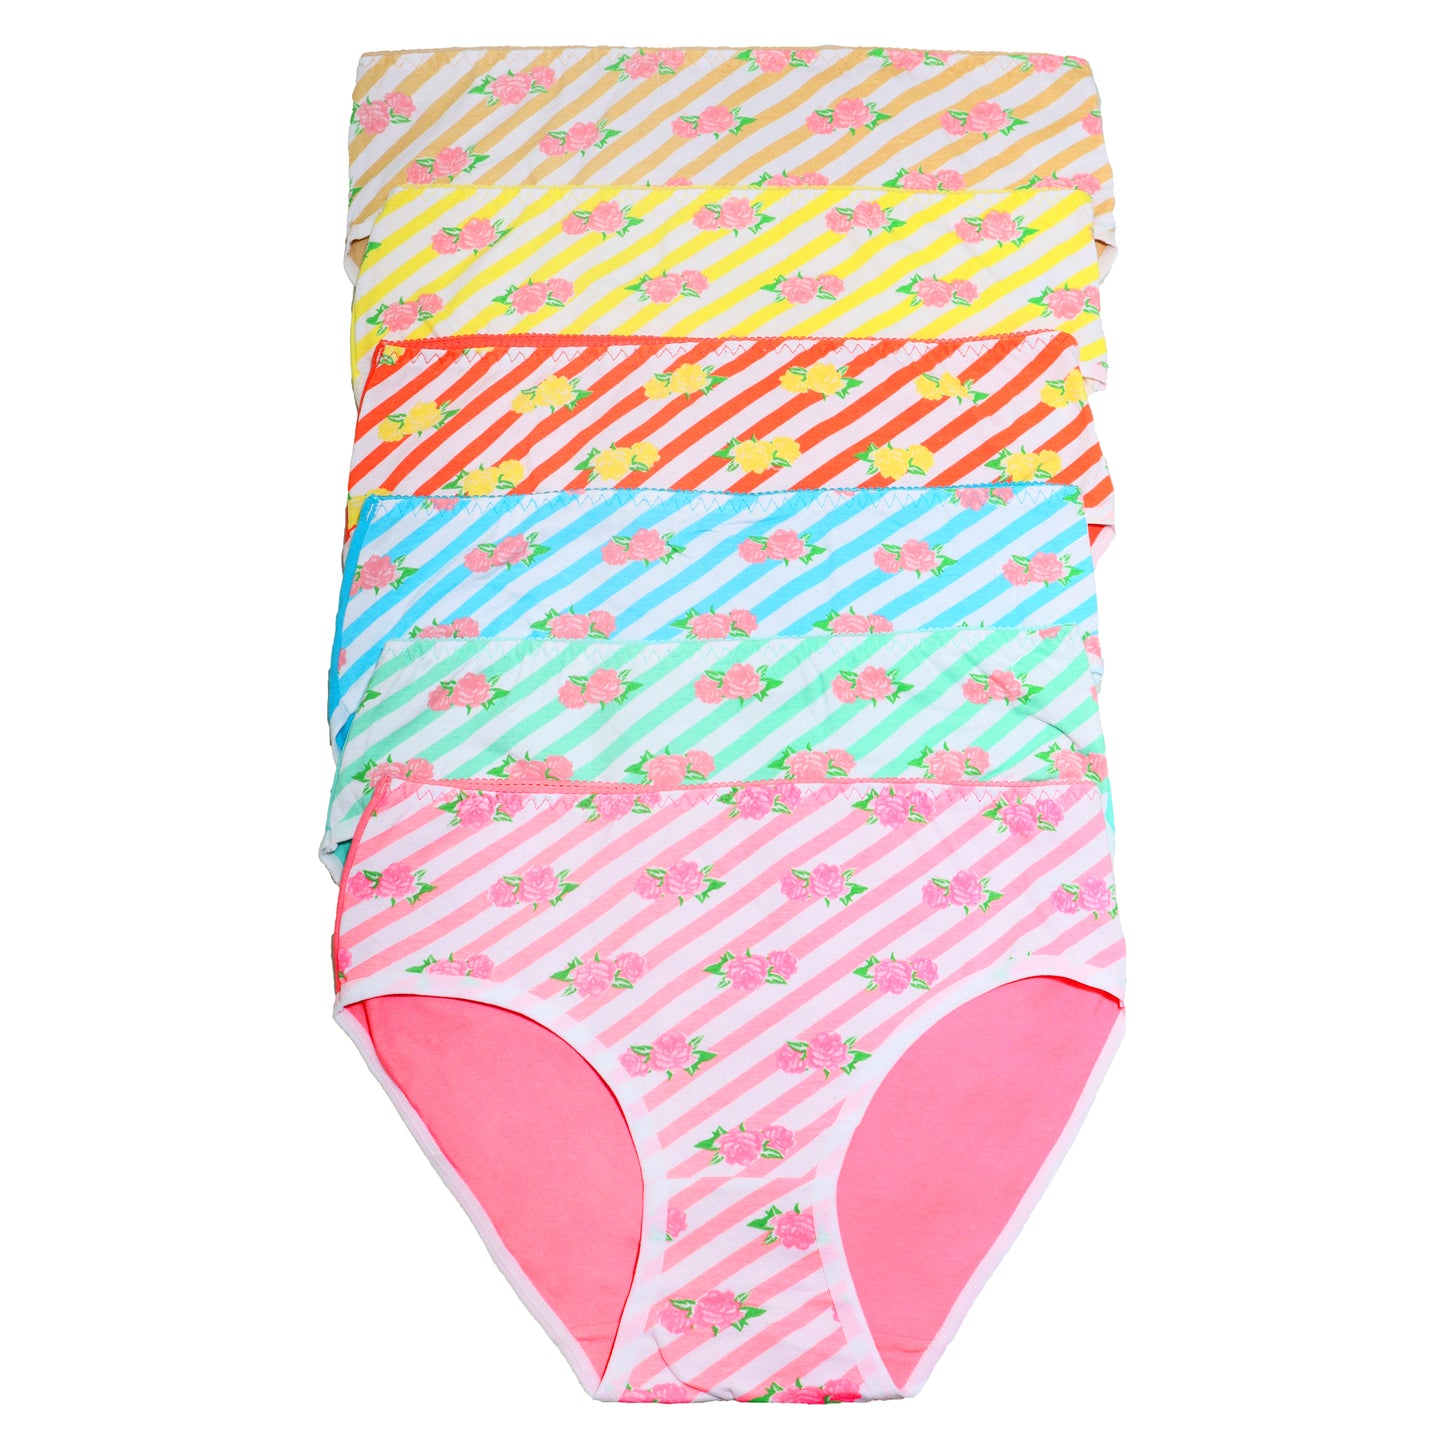 Cotton Bikini Panties with Roses and Stripes Design (6-Pack)